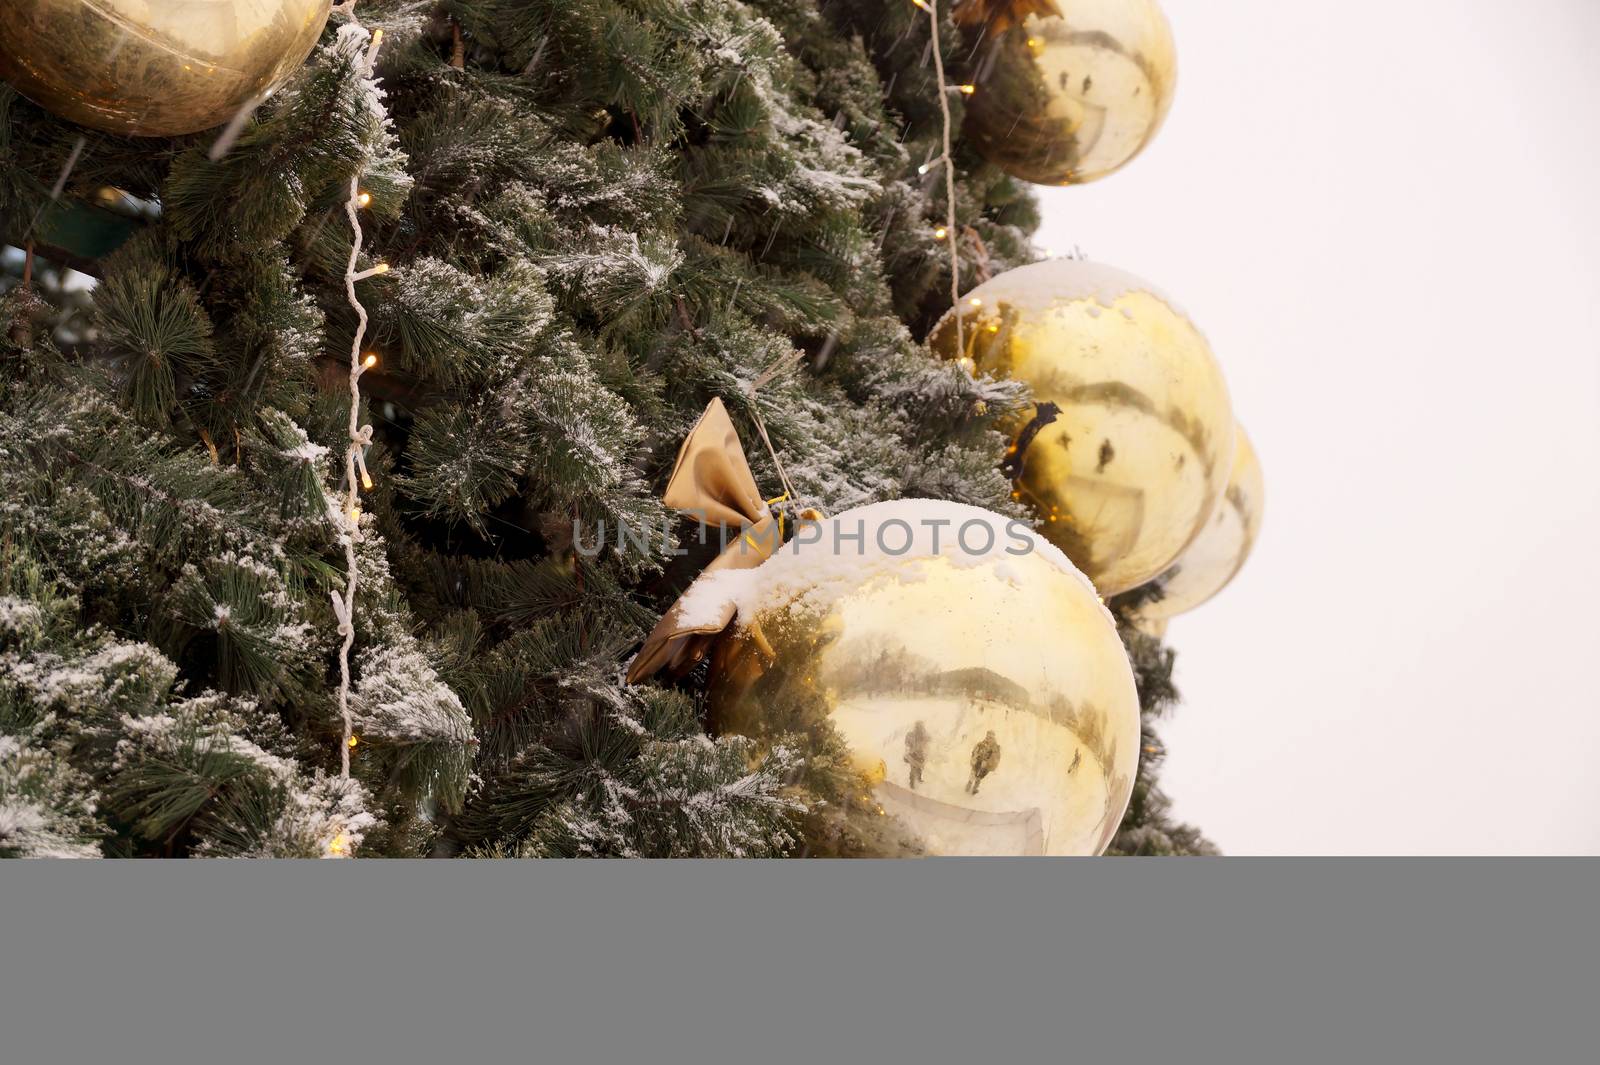 New Year's spheres on fir-tree branches by Vadimdem